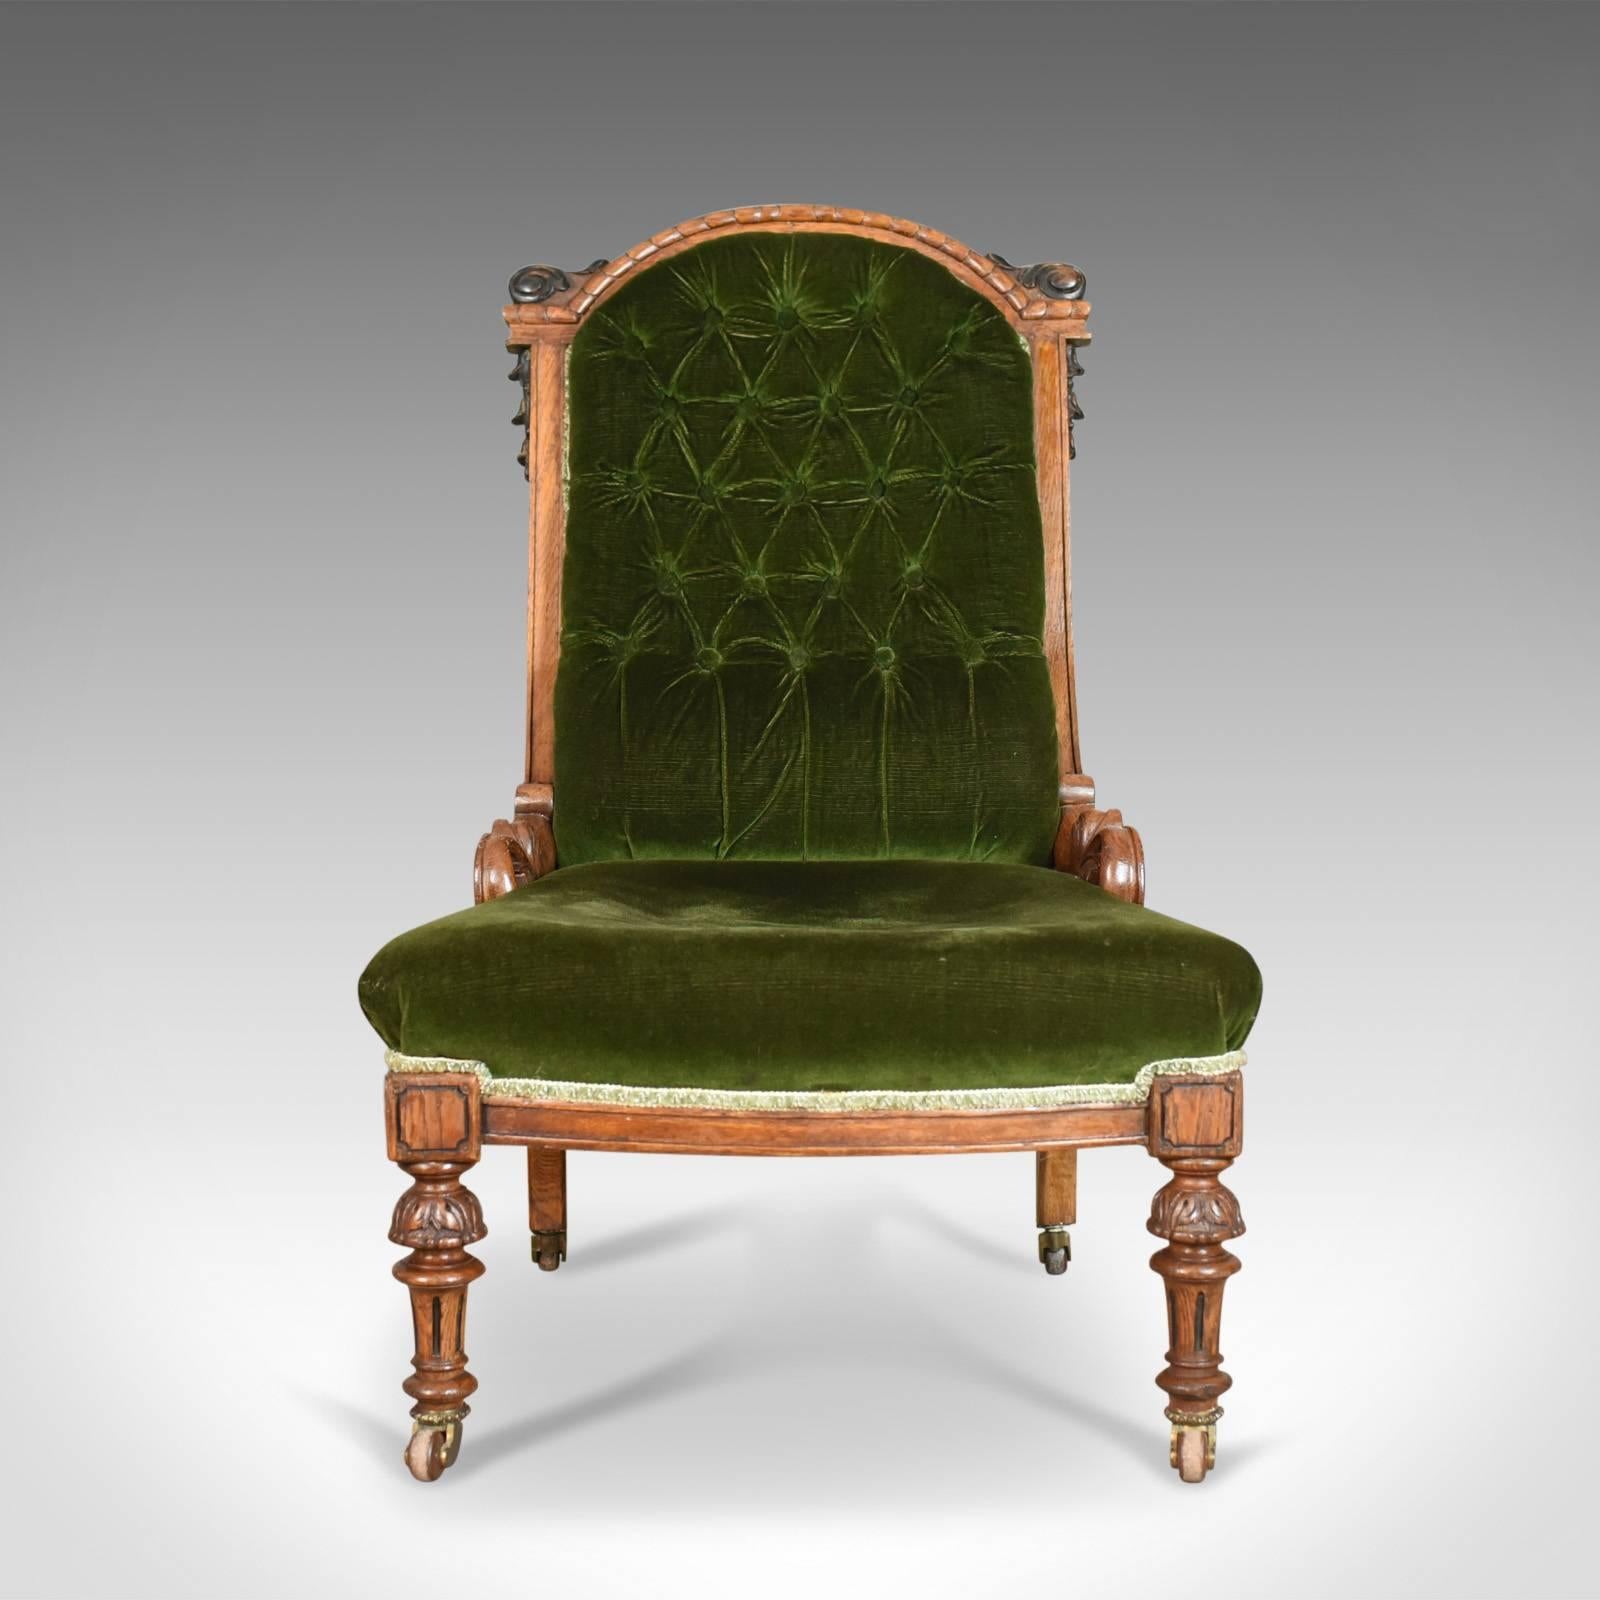 This is an antique chair, an Scottish oak button back nursing, or salon, chair dating to the early Victorian era, circa 1850.

Attractive contrast between the dark, emerald green cloth and oak frame
Desirable aged patina to the oak frame